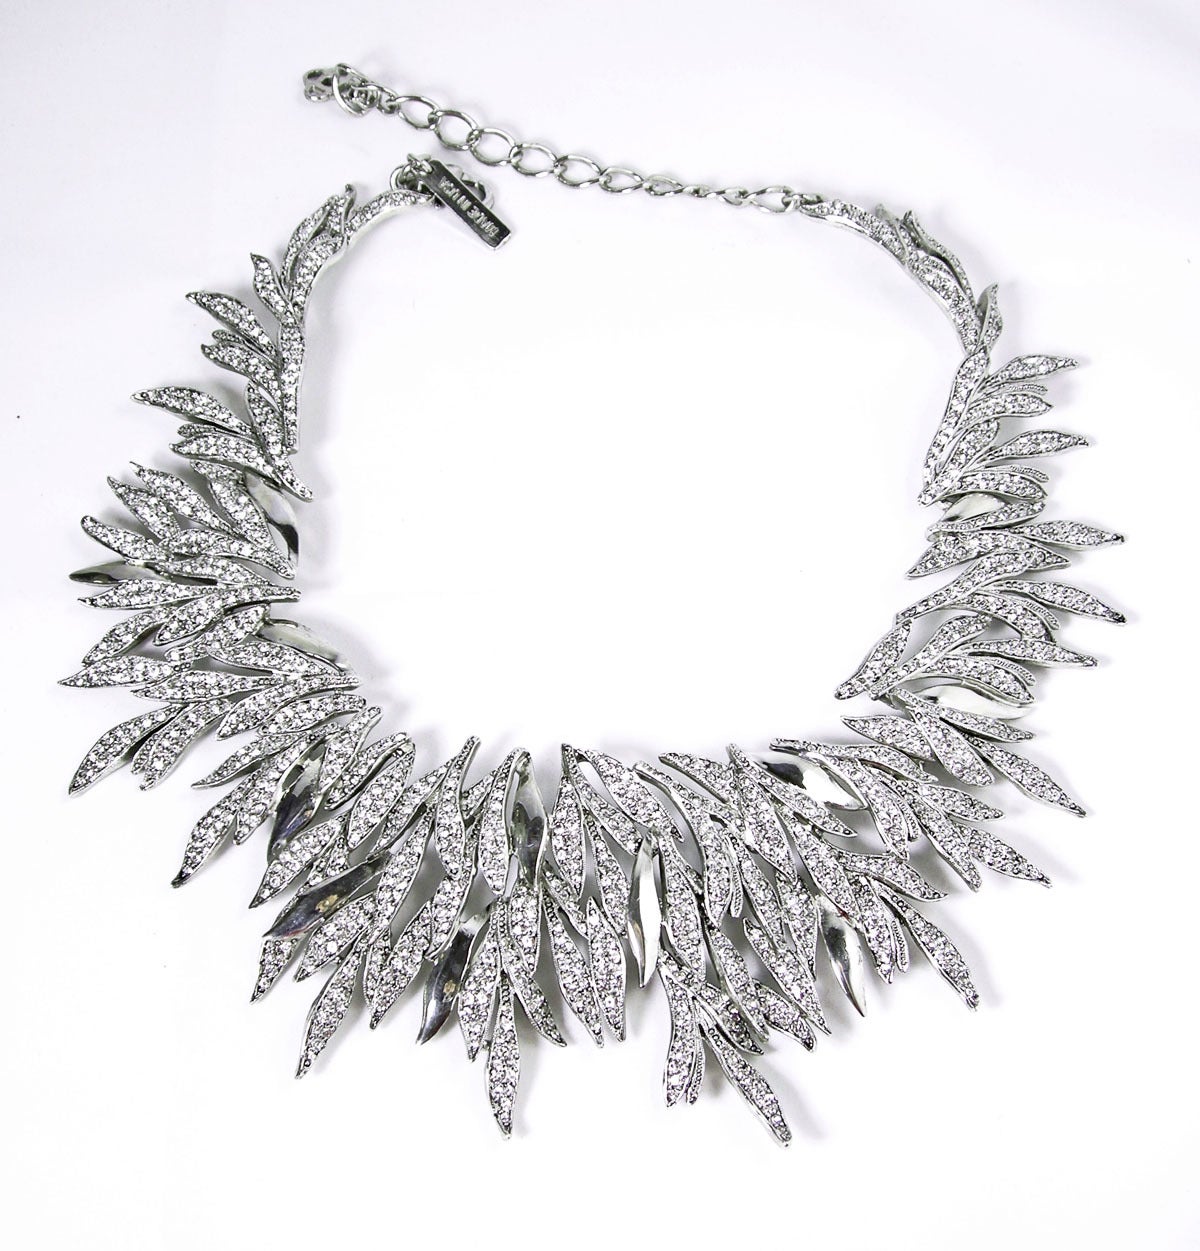 Ethereal and elegant this statement necklace features an intricate motif of cascading Austrian crystals leaves in a silver plated setting. It is simply dazzling with its fabulous pave crystal leaves. The necklace is very flexible and is signed